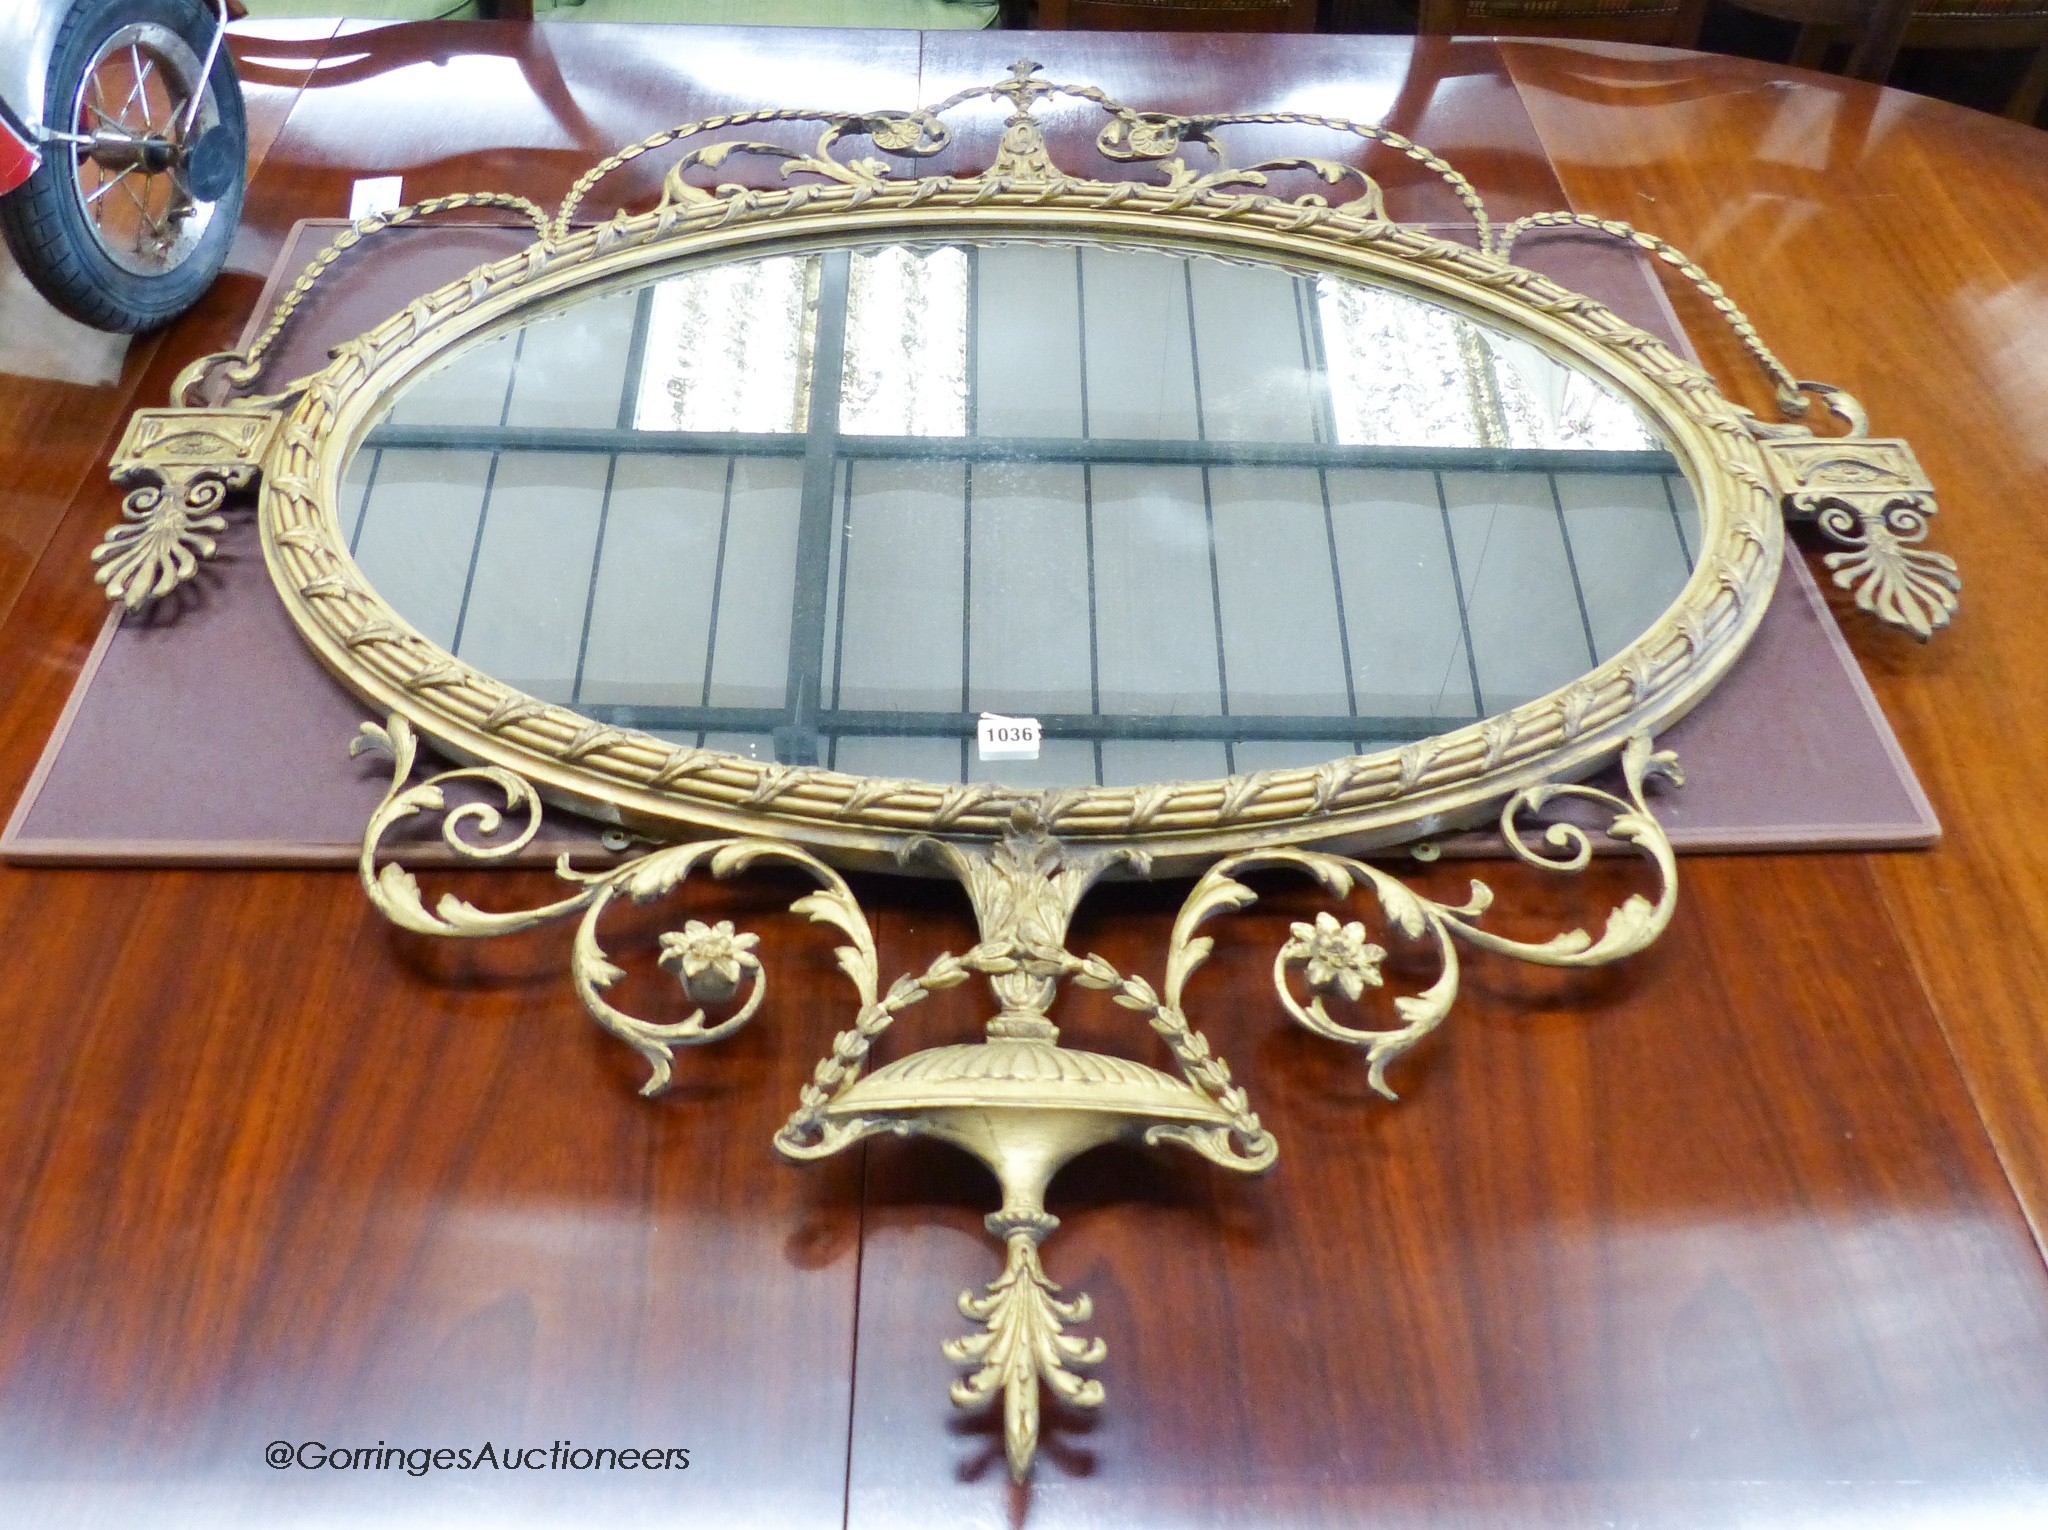 A 19th century regency style oval gilt wood and gesso wall mirror with urn finial. W-113, H-116cm.